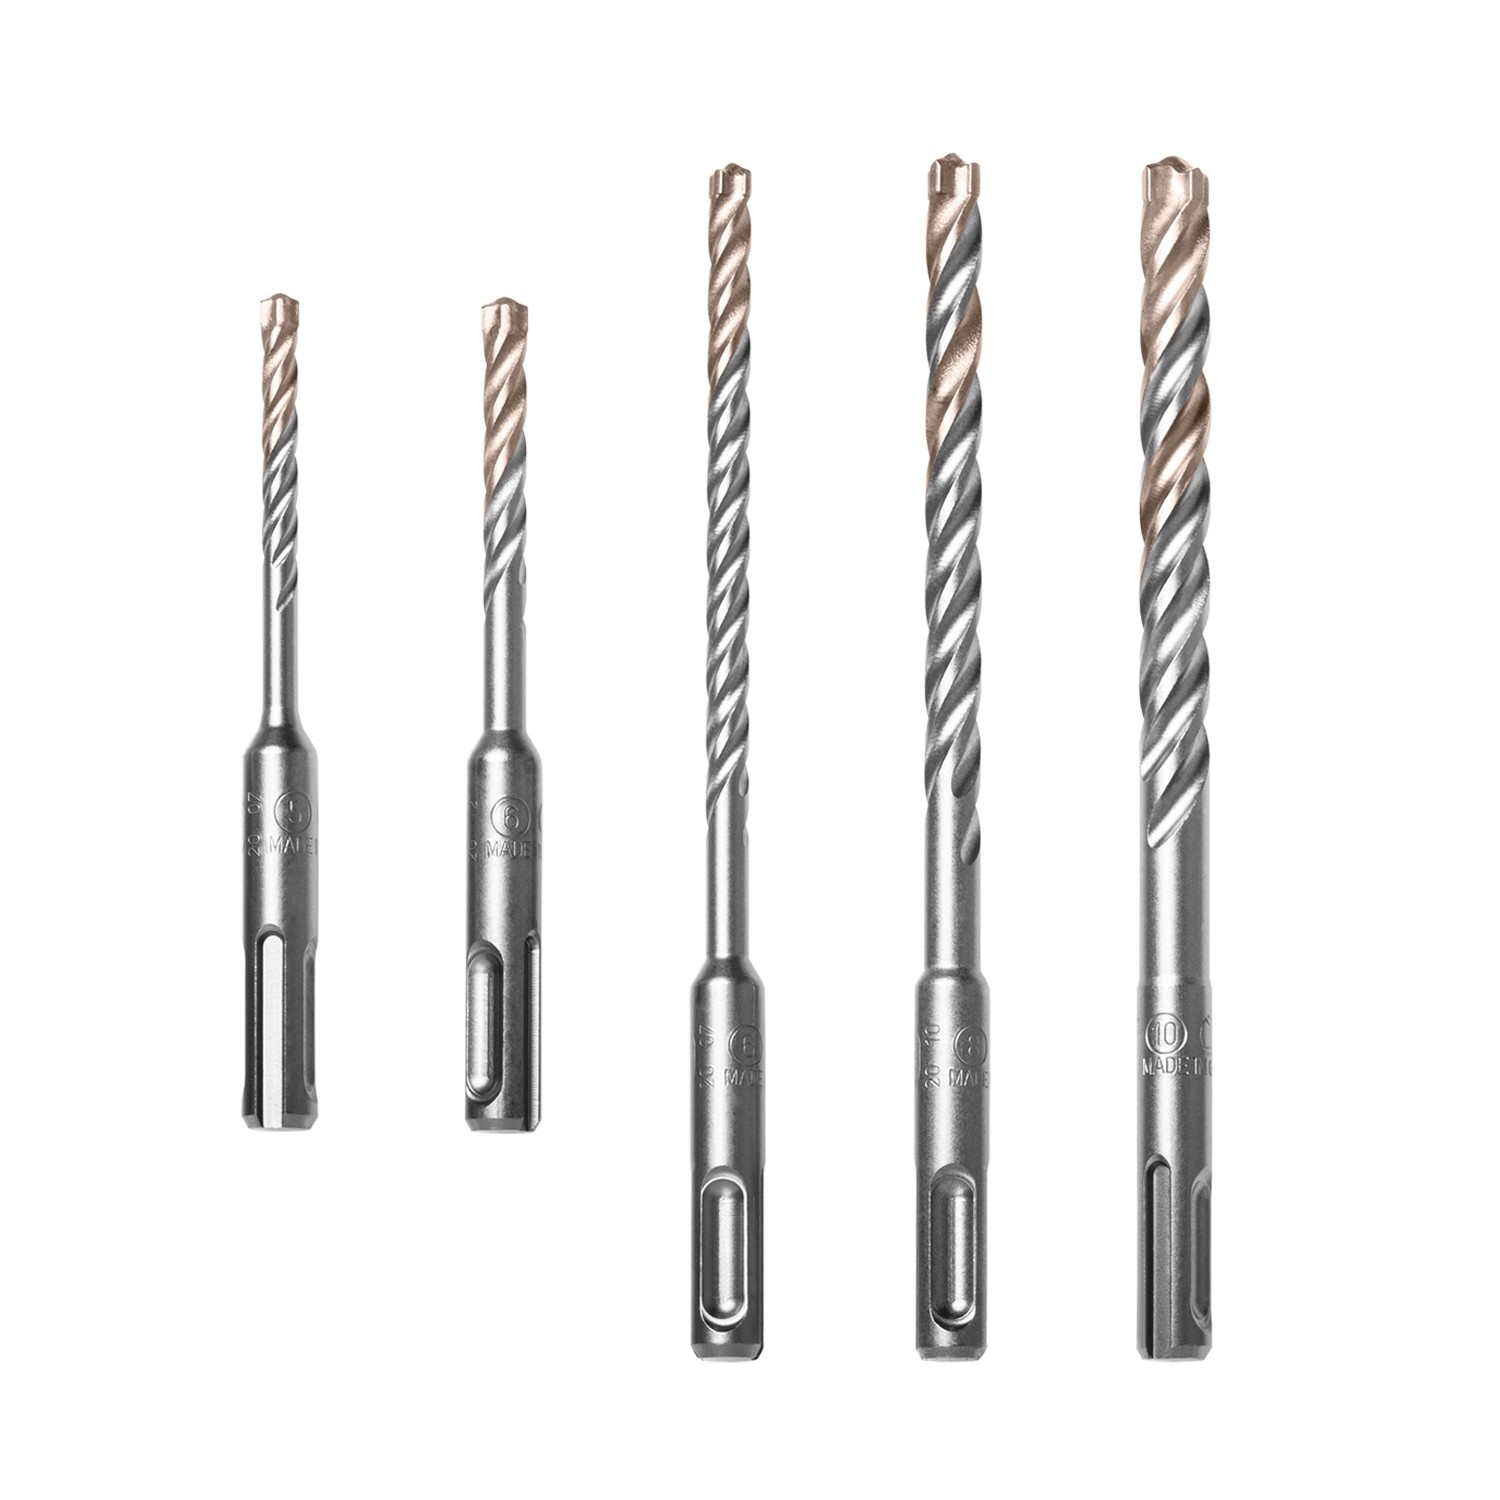 Buy the SDS plus hammer drill bits with 4-fold cutting edge in different lengths and sizes at favourable prices.